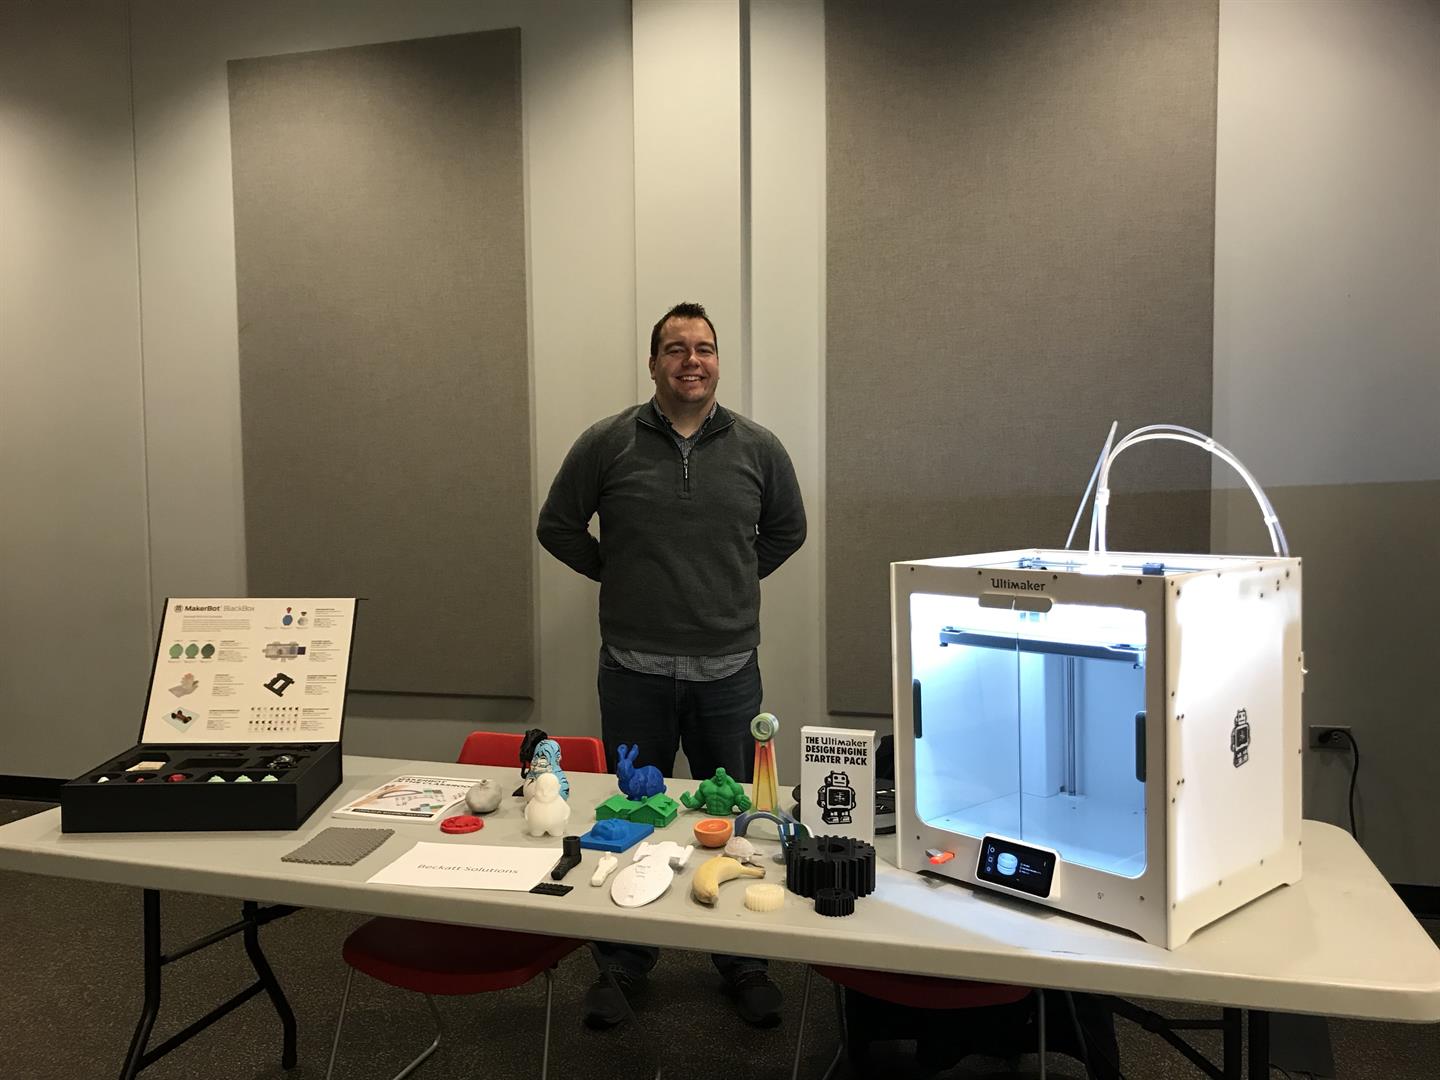 Owner Michael Storey demonstrating 3D printing and showing 3D prints.